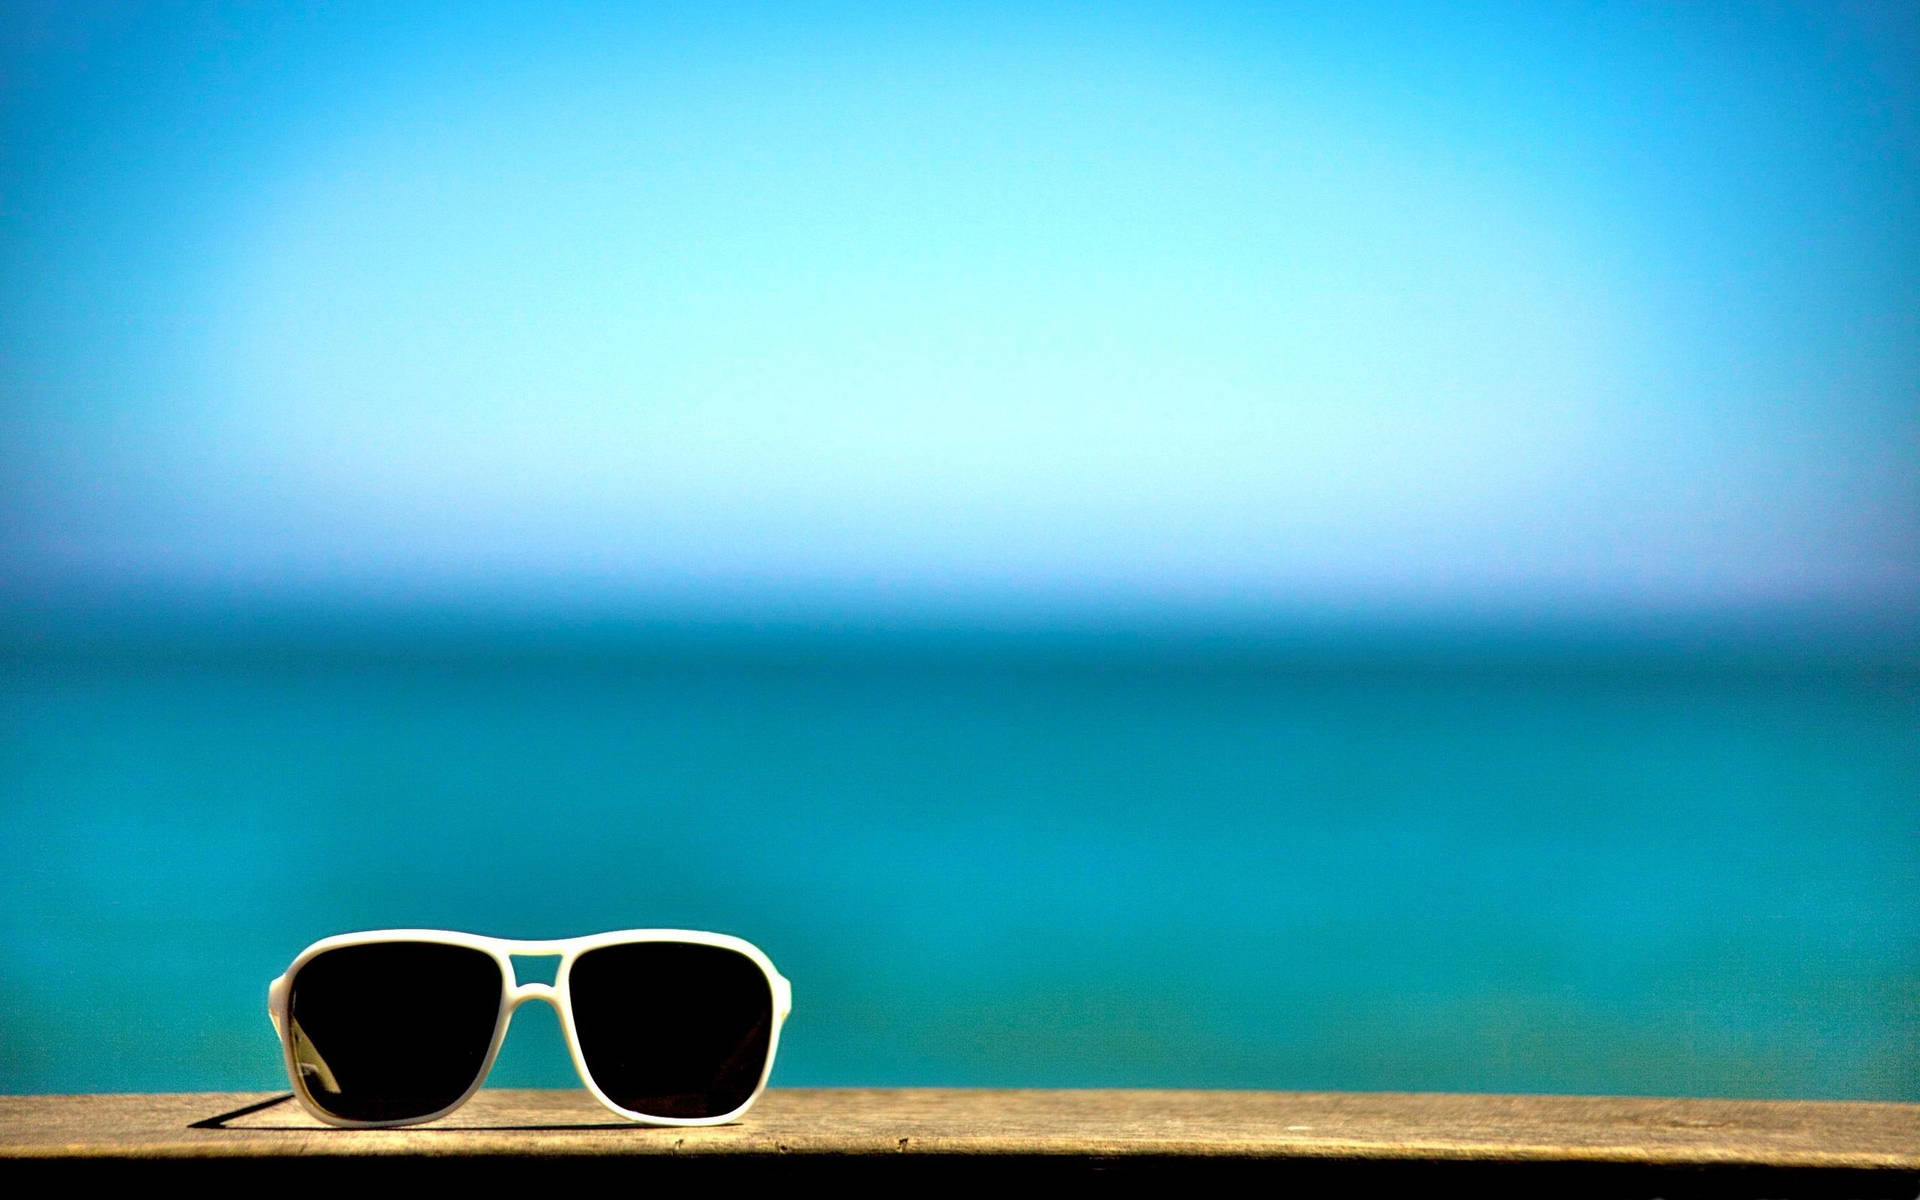 A Pair Of Sunglasses On A Wooden Bench Wallpaper